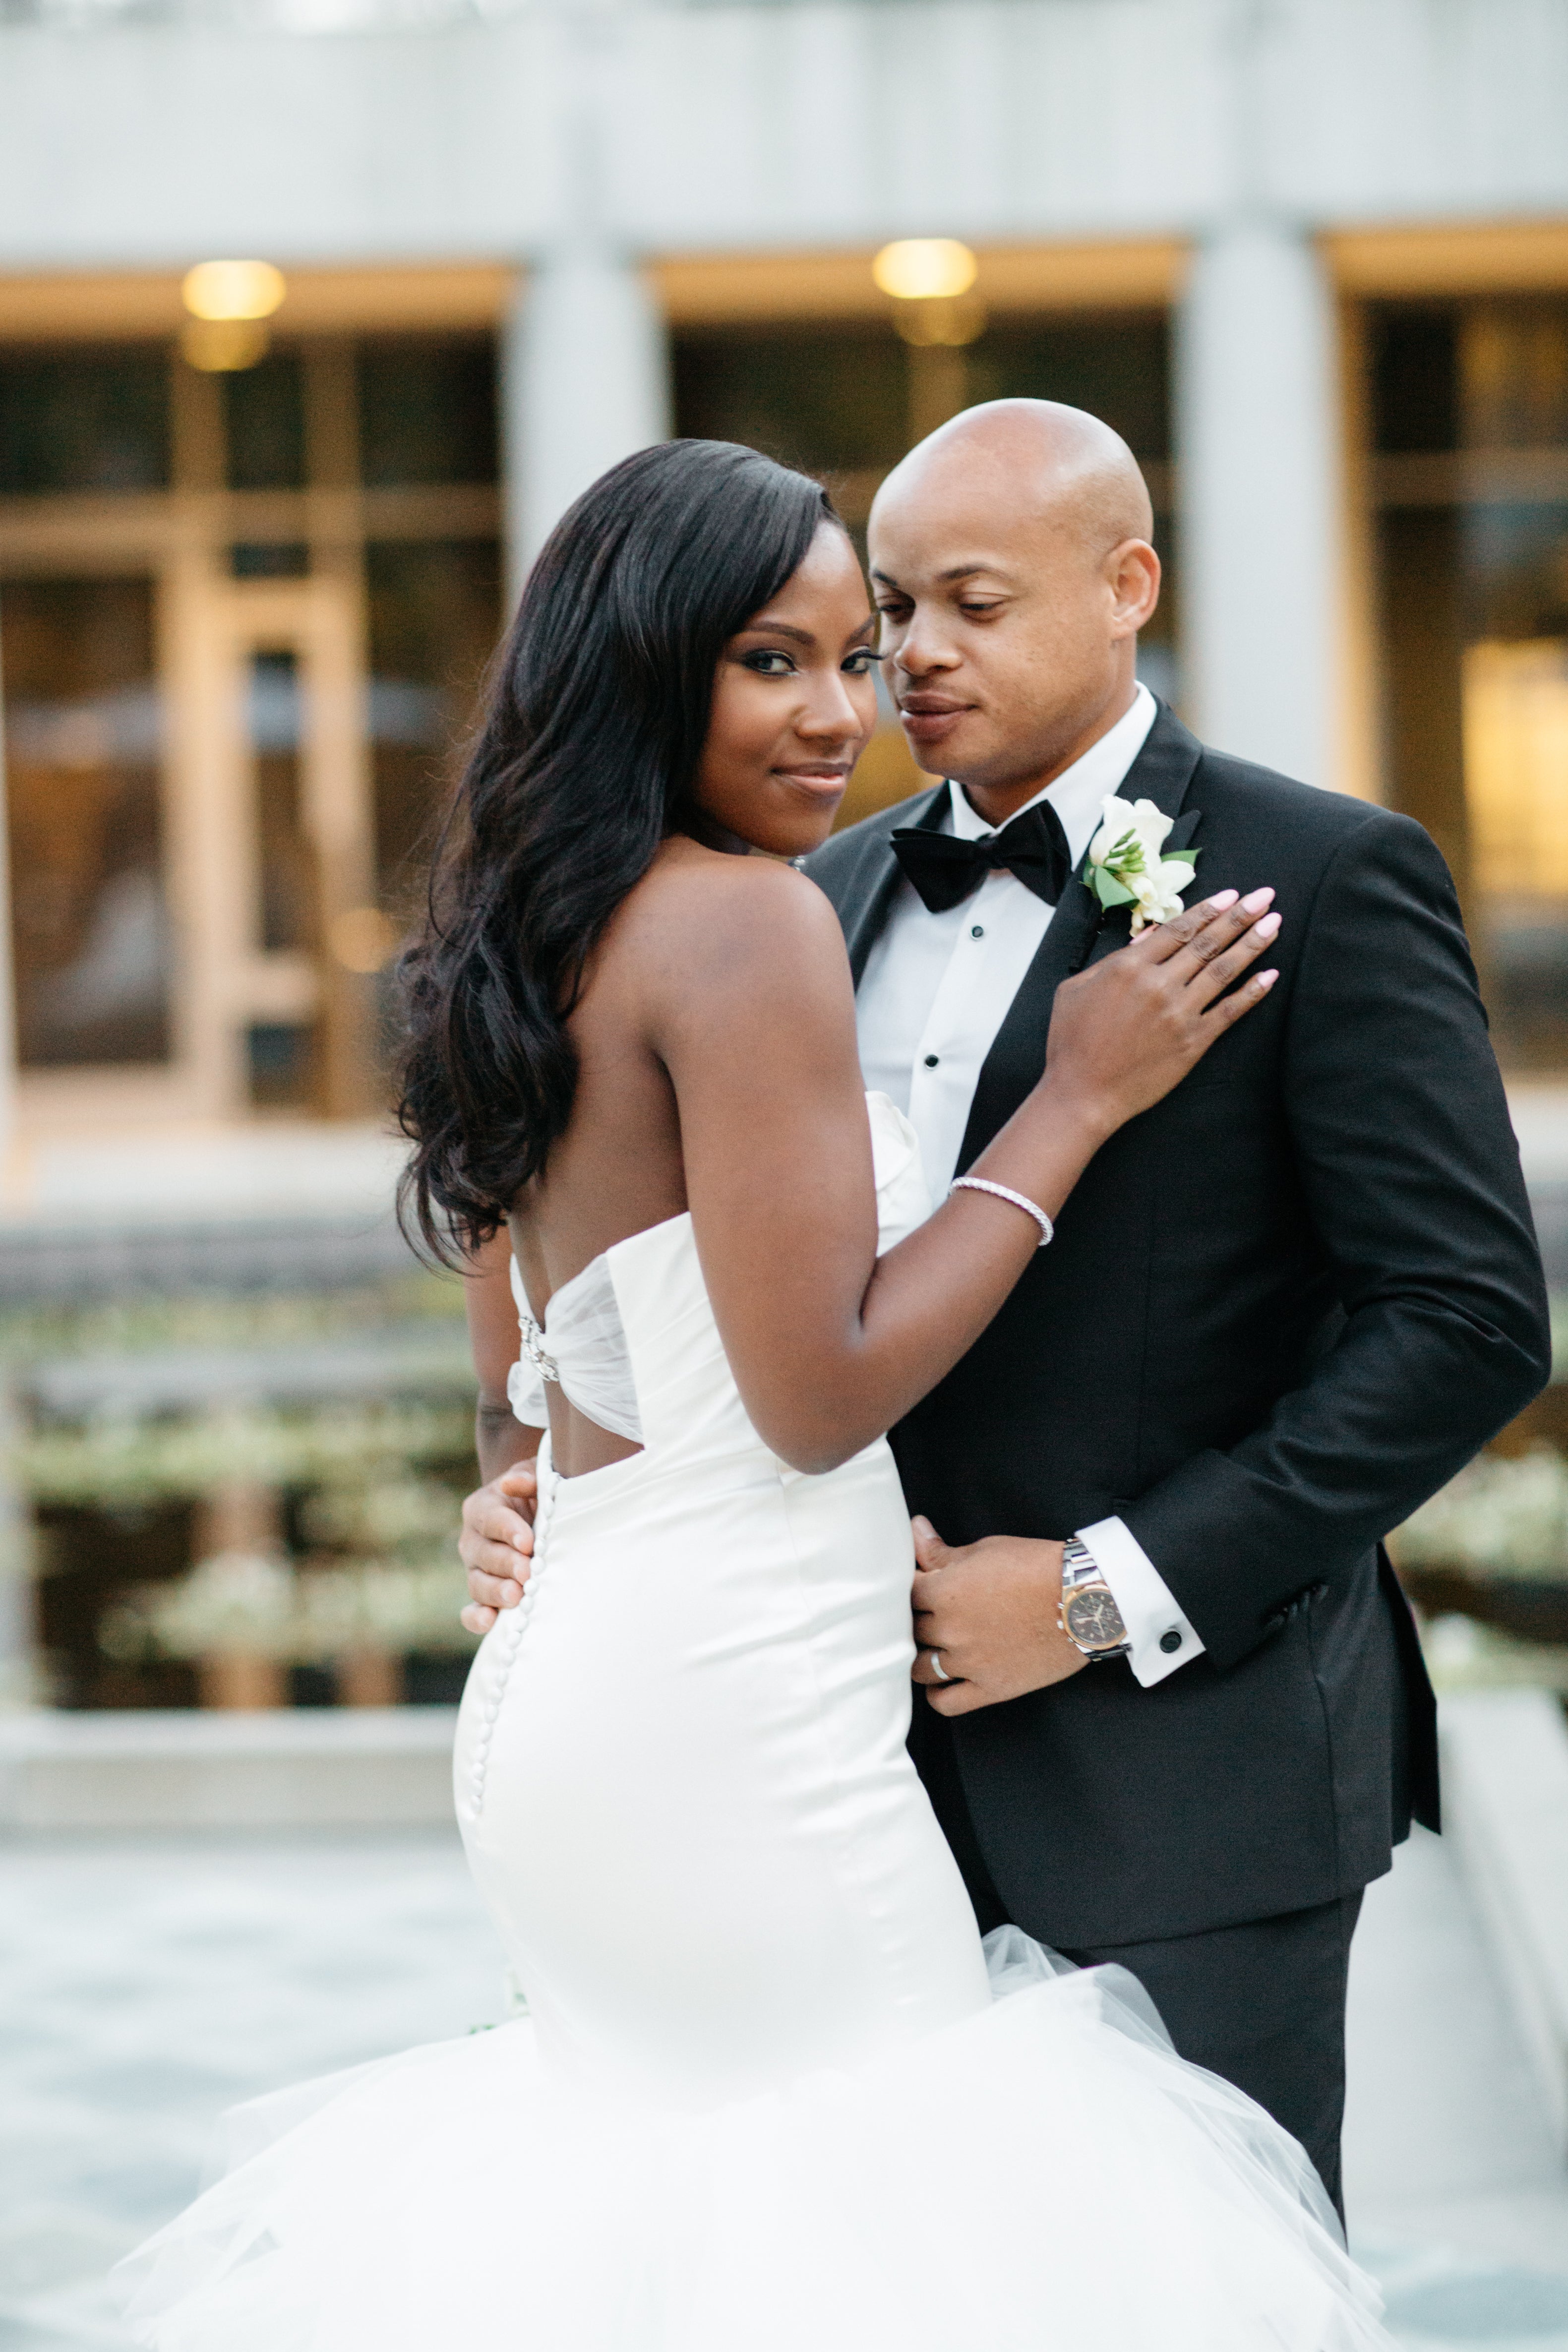 10 Recent Brides Share How One Trick Saved Them Thousands On Their Wedding Day
